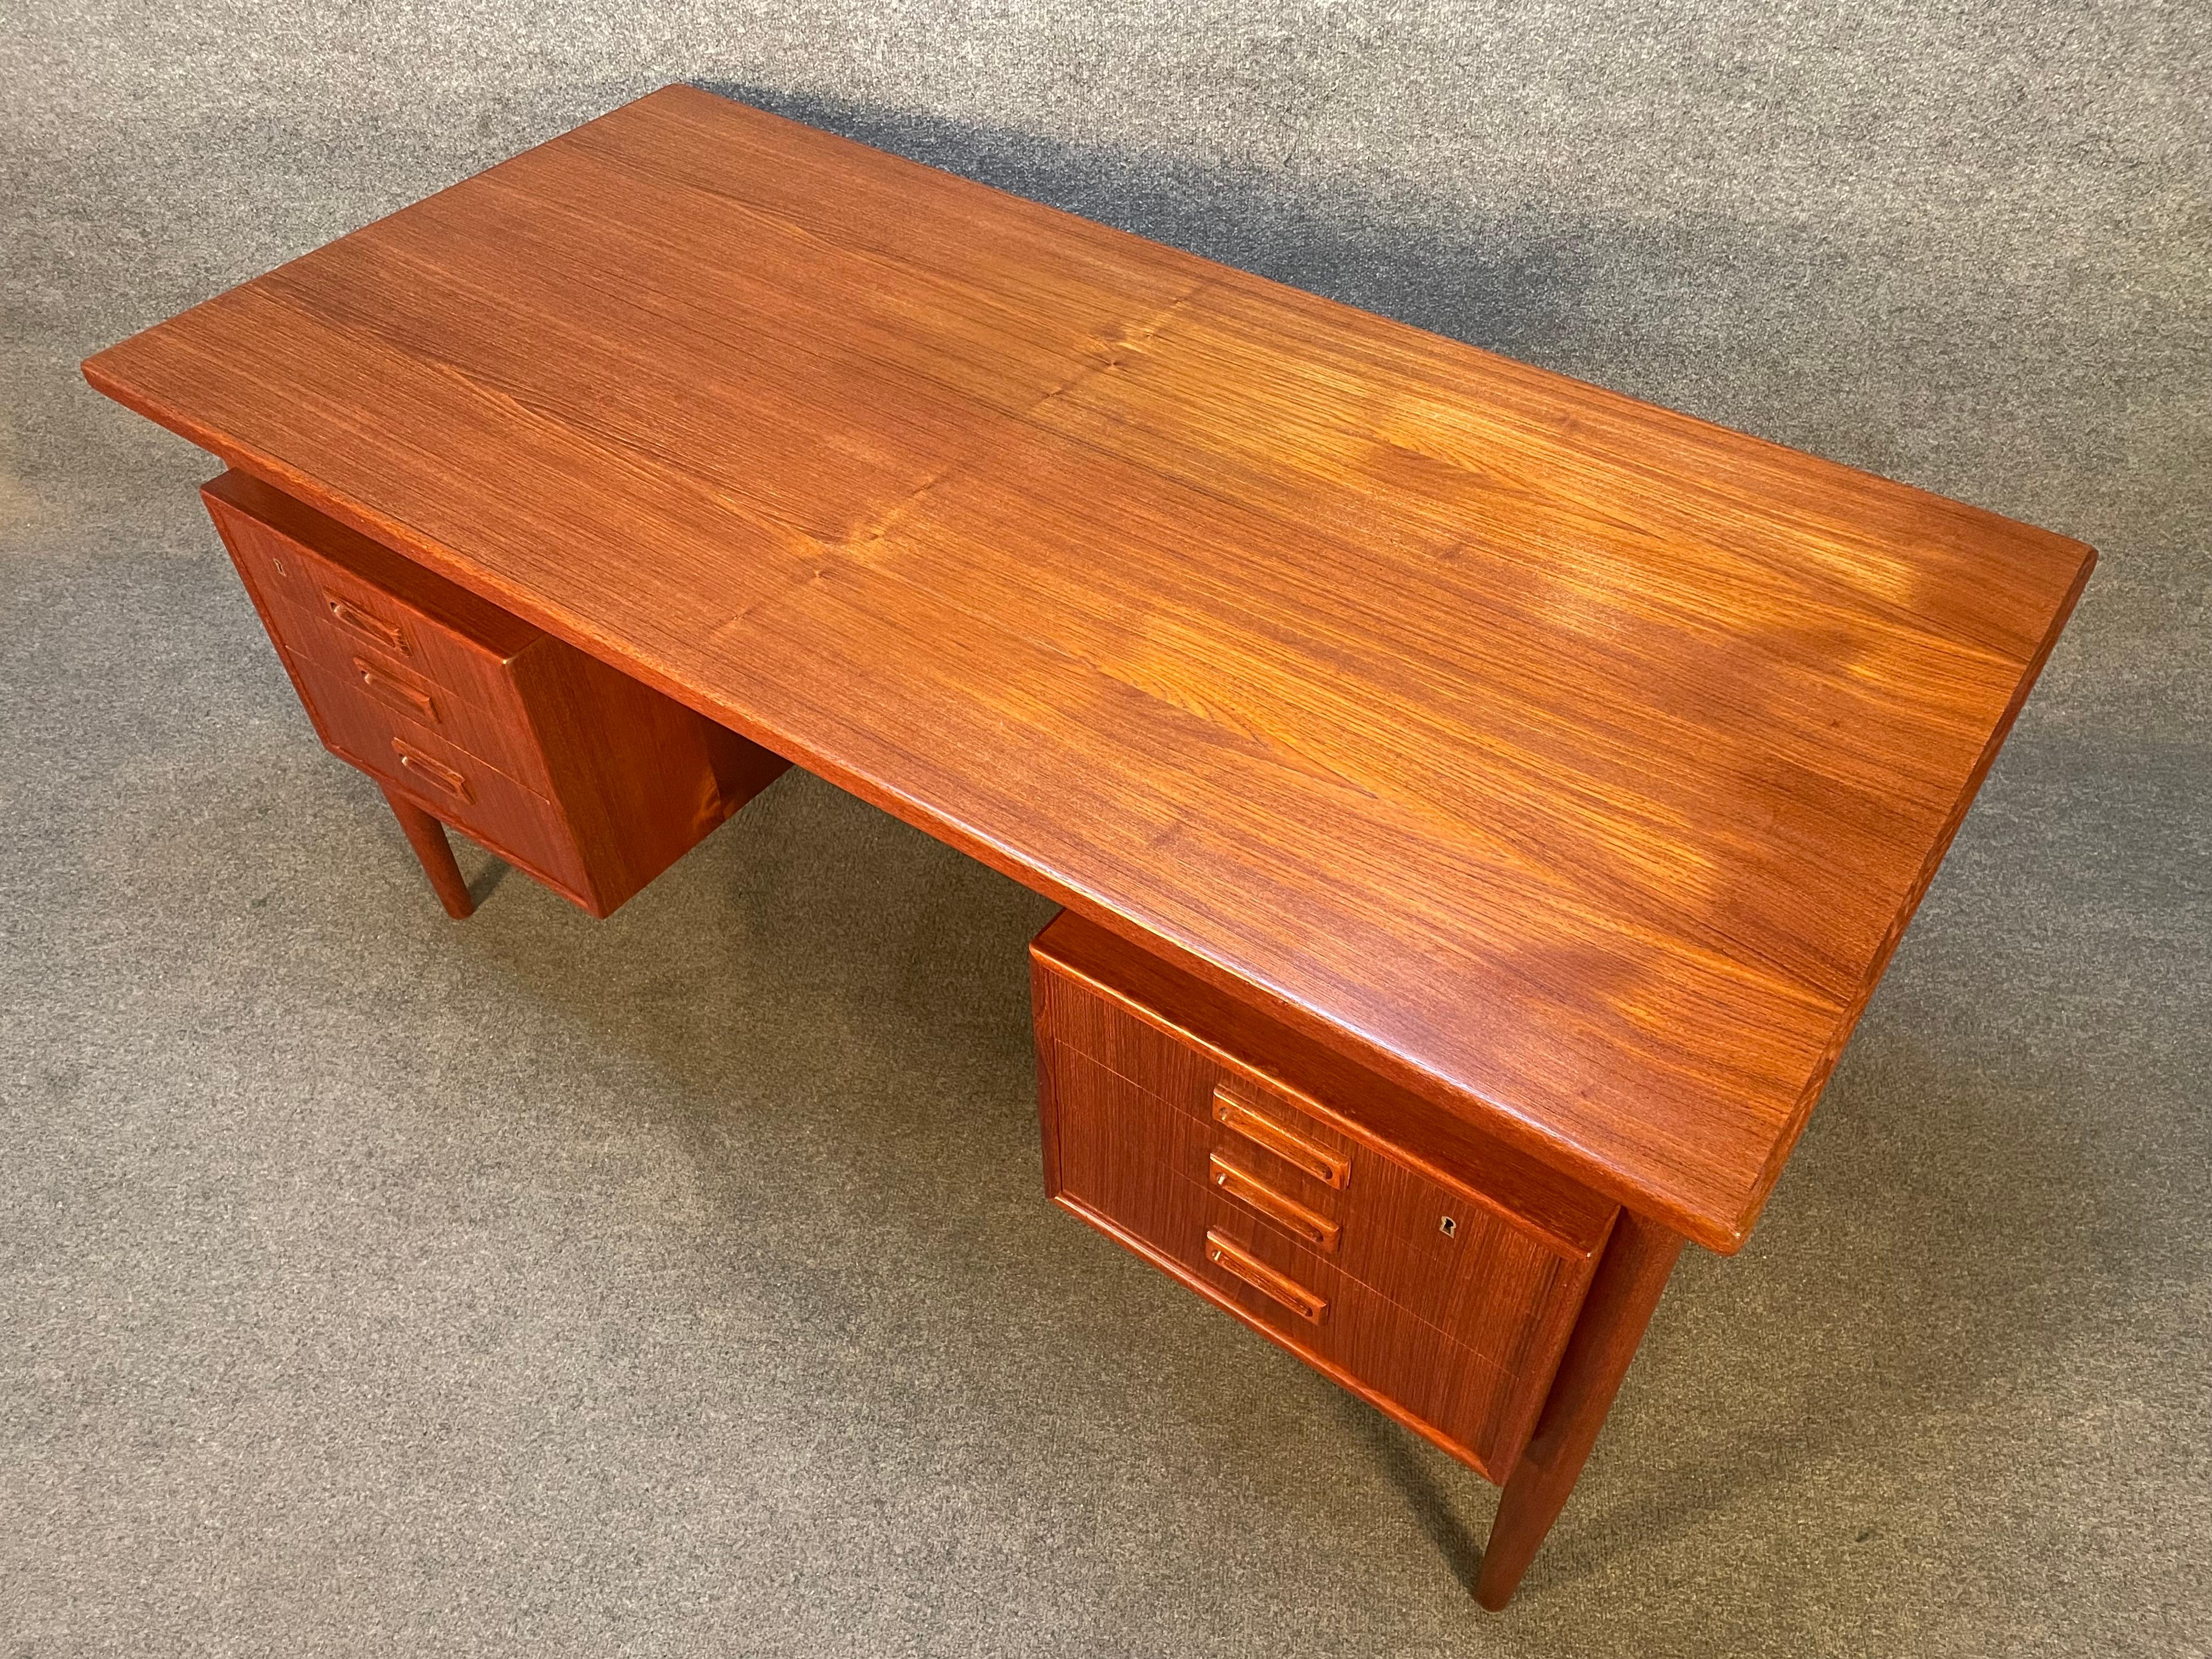 Here is a beautiful Scandinavian modern writing desk in teak wood manufactured by H.P. Hansen in Denmark in the 1960's.
This lovely desk, recently imported from Europe to California before its refinishing, features a large top showing vibrant wood